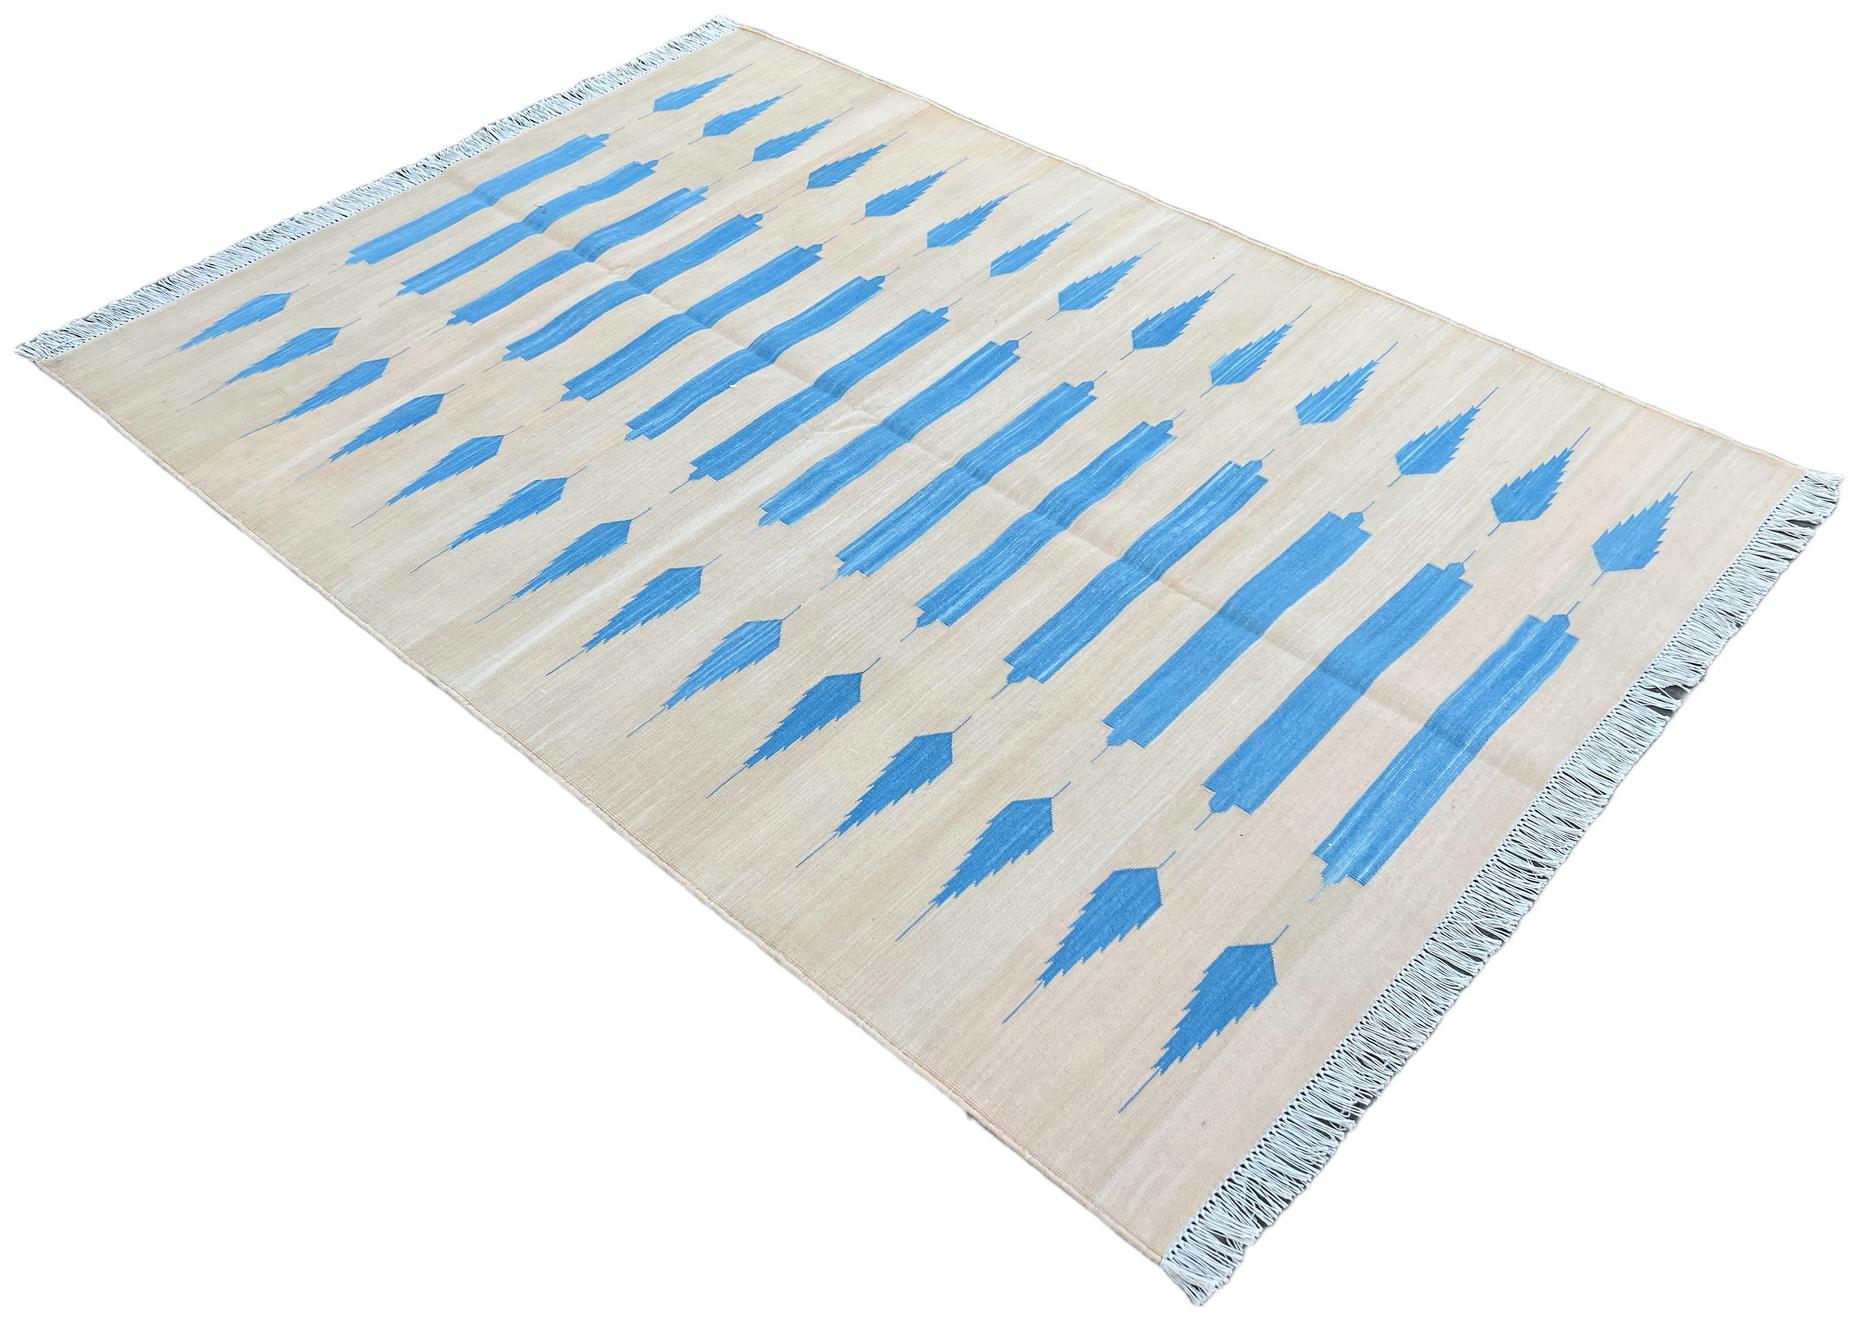 Cotton Vegetable Dyed Cream And Blue Striped Indian Dhurrie Rug-4'x6' 
These special flat-weave dhurries are hand-woven with 15 ply 100% cotton yarn. Due to the special manufacturing techniques used to create our rugs, the size and color of each